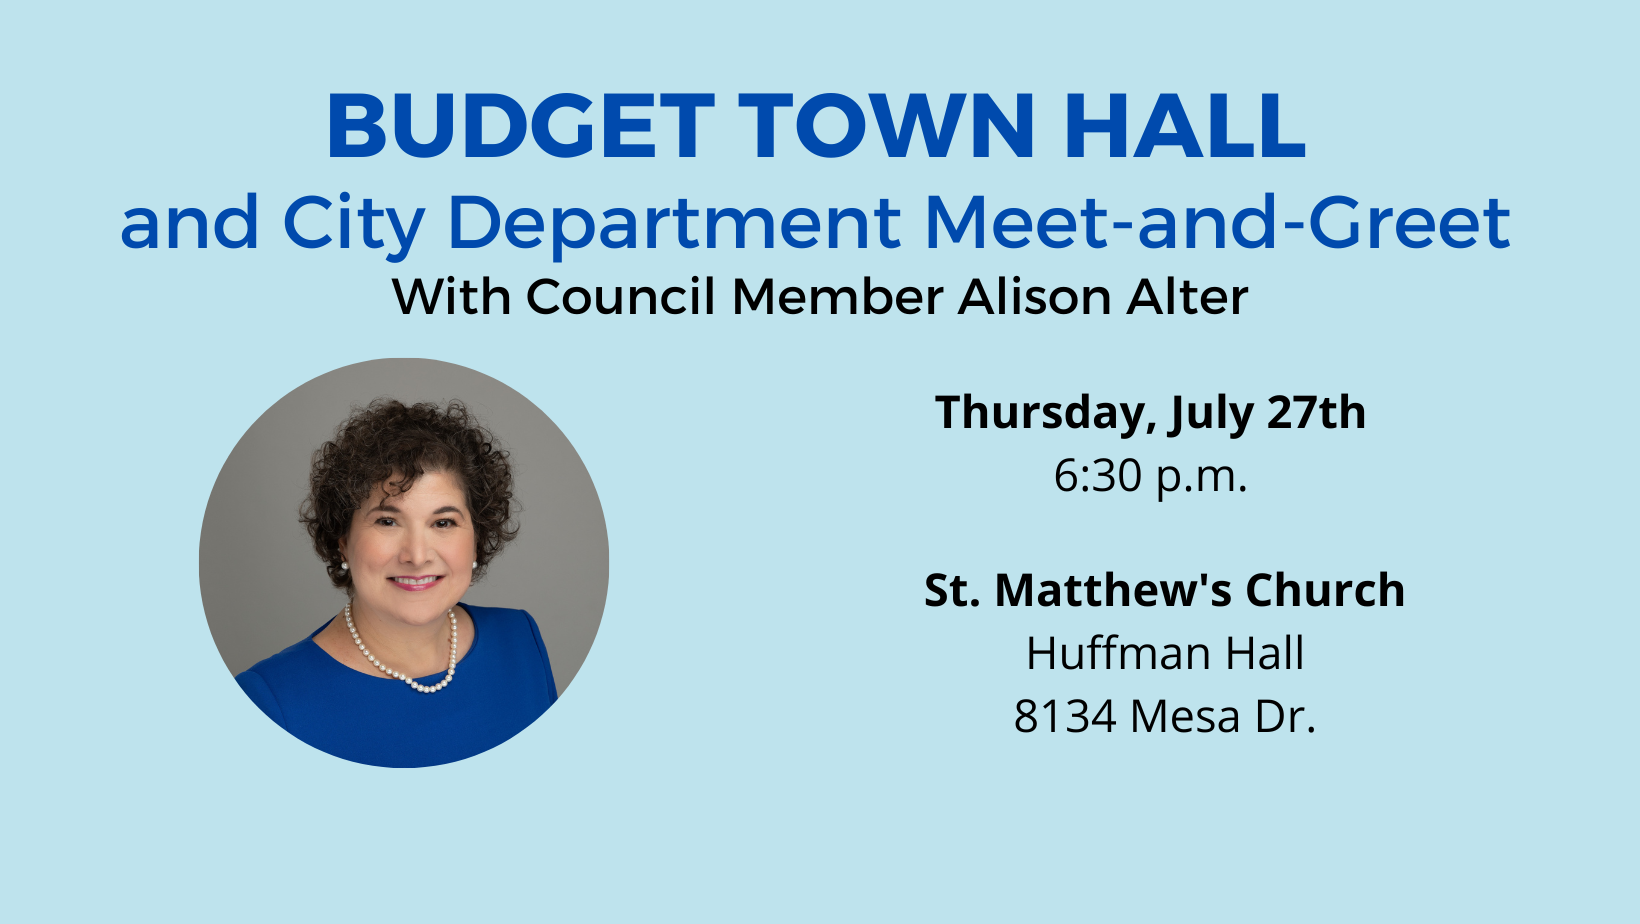 Budget Town Hall, City Department Meet-and-Greet, and Summer Office Hours